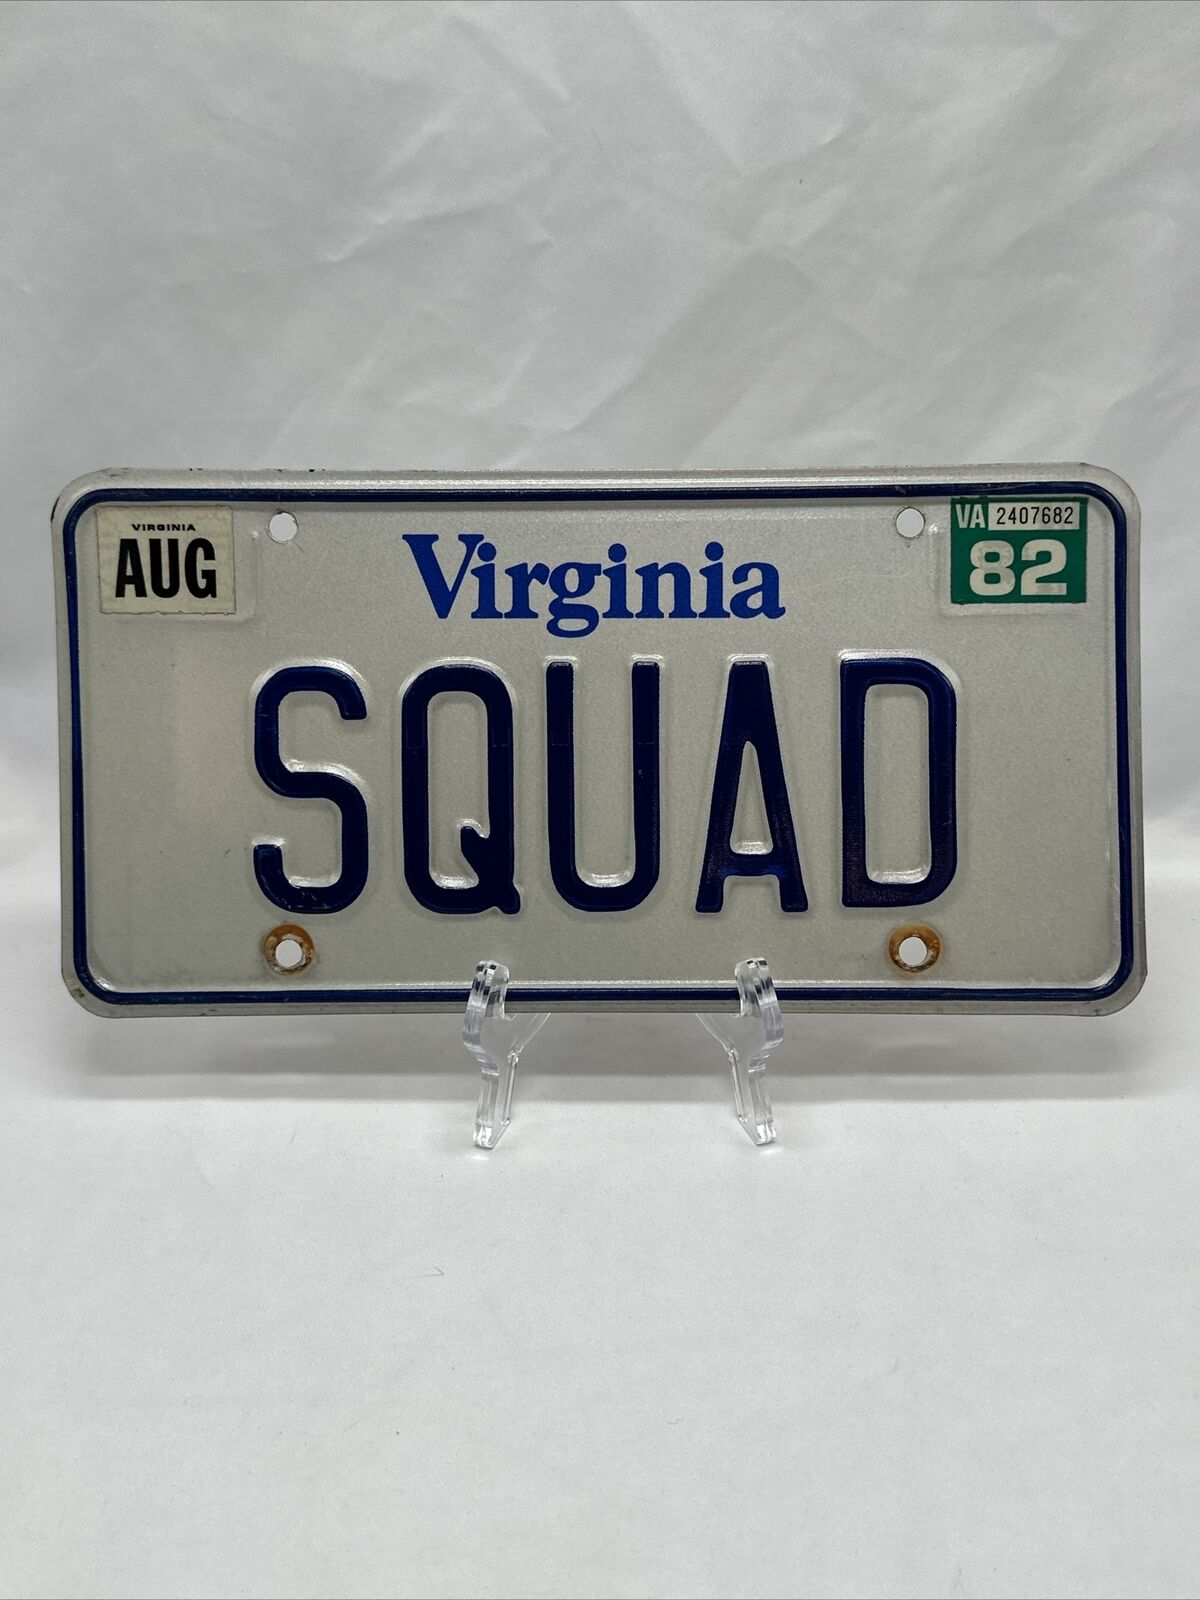 Expired Virginia “SQUAD” Personalized Vanity License Plate 1980s